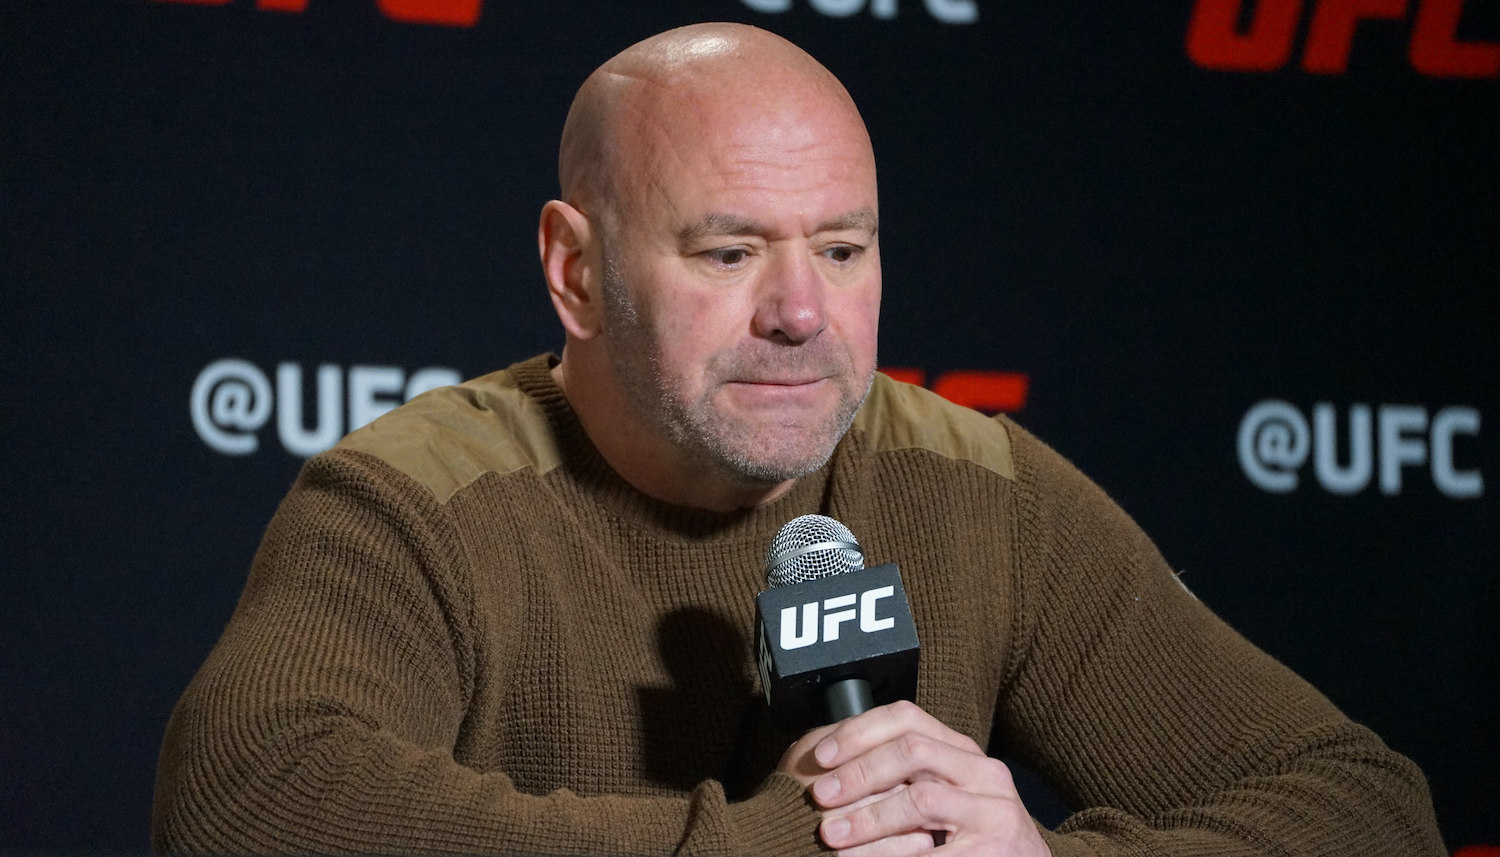 Dana White speaks to the media at the UFC Vegas 67 media day for the first time since he was caught slapping is wife on New Years Eve. January 11, 2023, at the UFC APEX in Las Vegas, NV. (Photo by Amy Kaplan/Icon Sportswire via Getty Images)